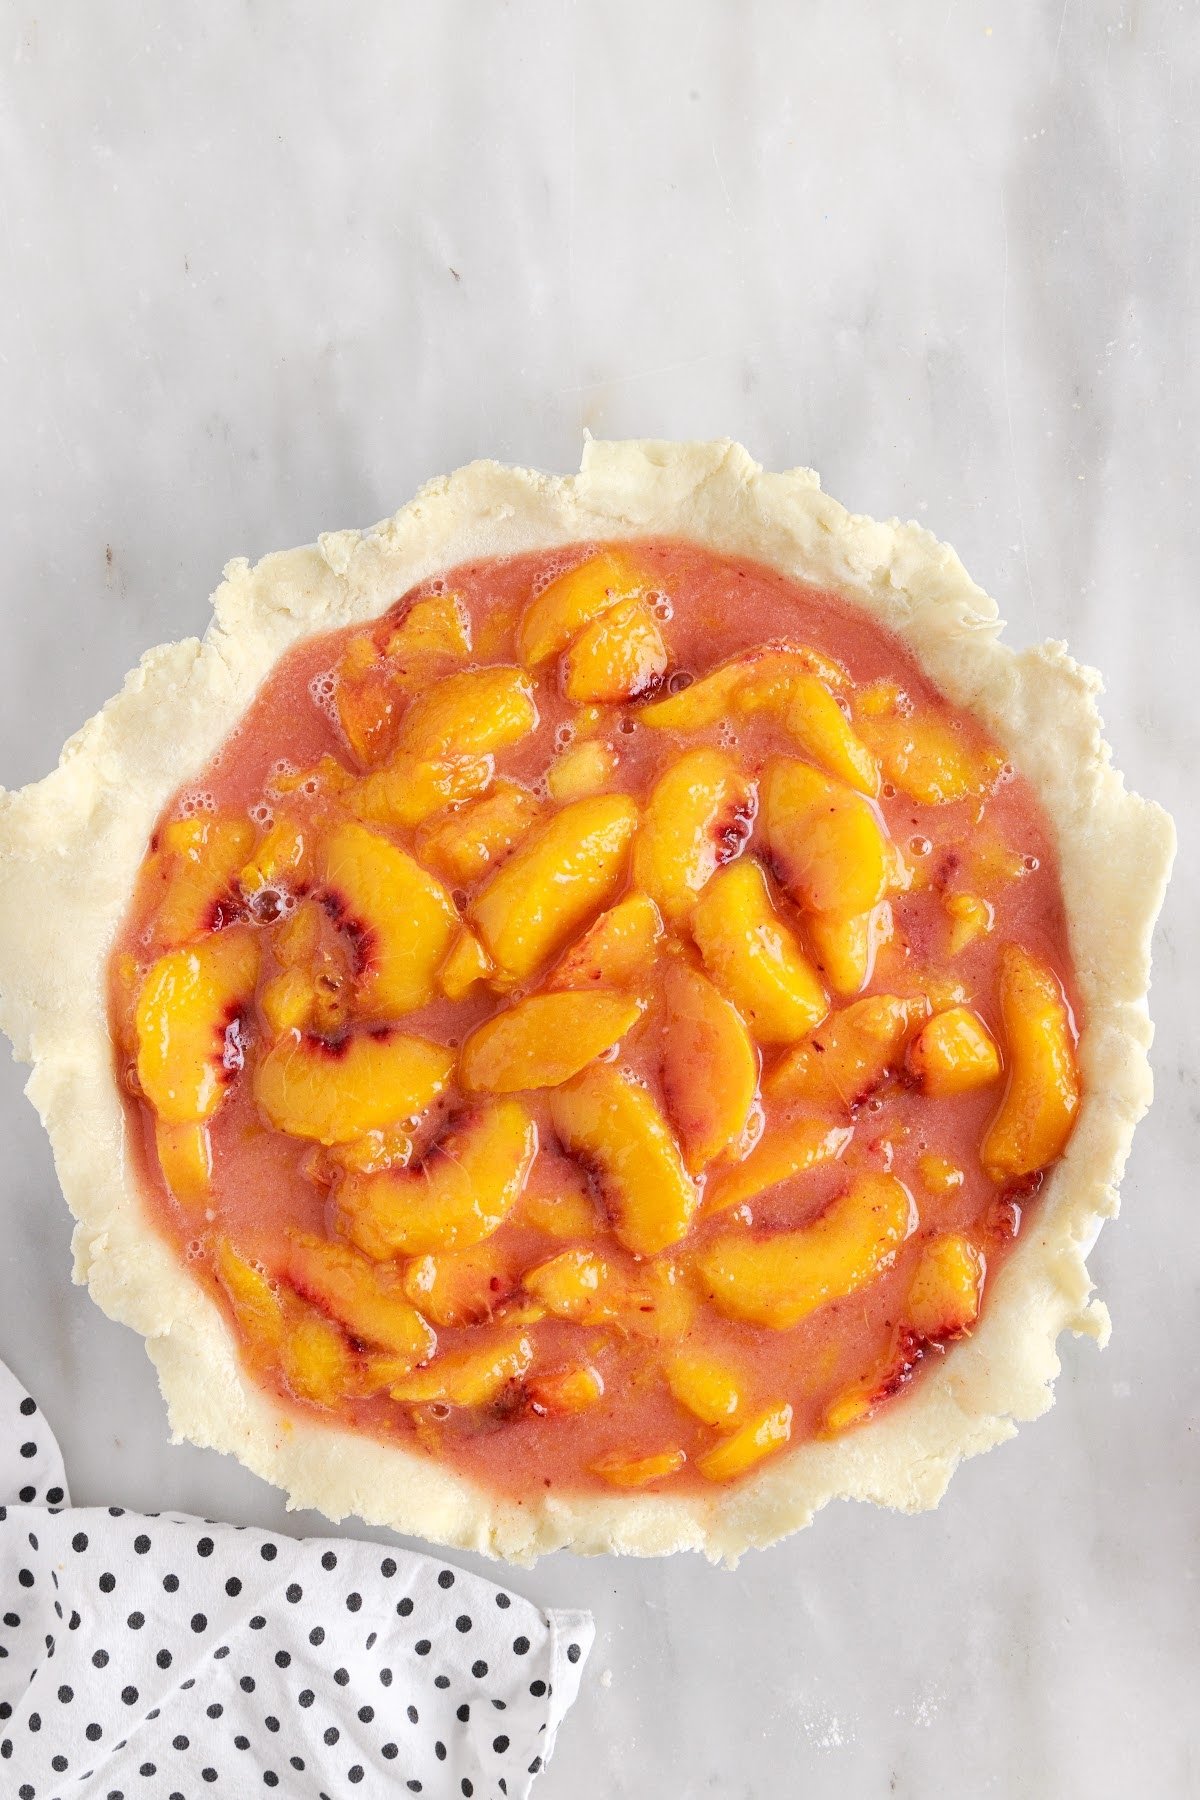 Peach mixture poured into the pie crust.